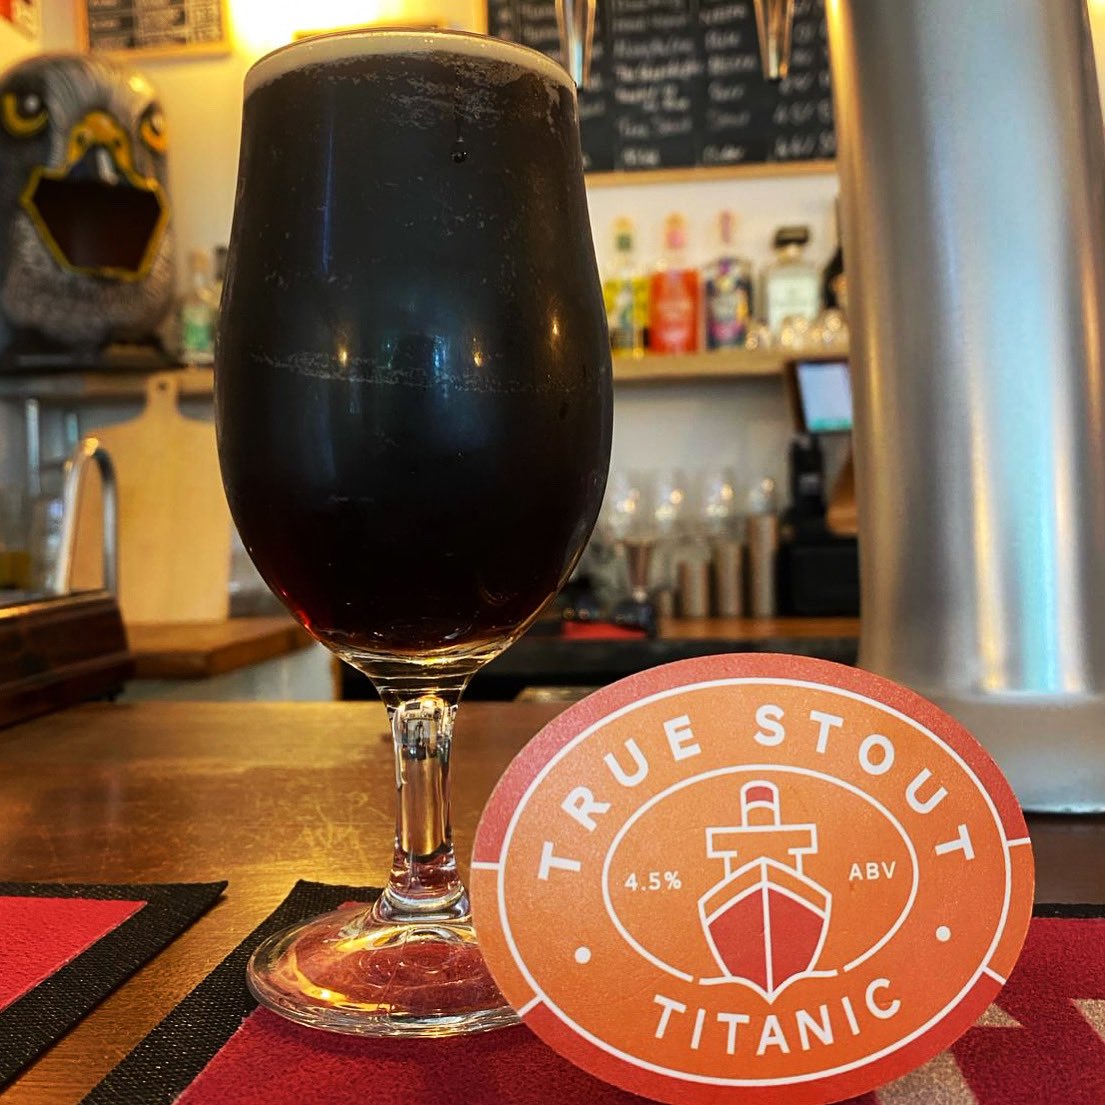 A keg version of the classic @TitanicBrewers Stout now pouring at The Falcon! 

True Stout is brewed with carefully selected roasted barley, delicately hopped and served through a nitro pour to give it a silky-smooth creamy taste. It’s brewed exactly as a stout truly should be.